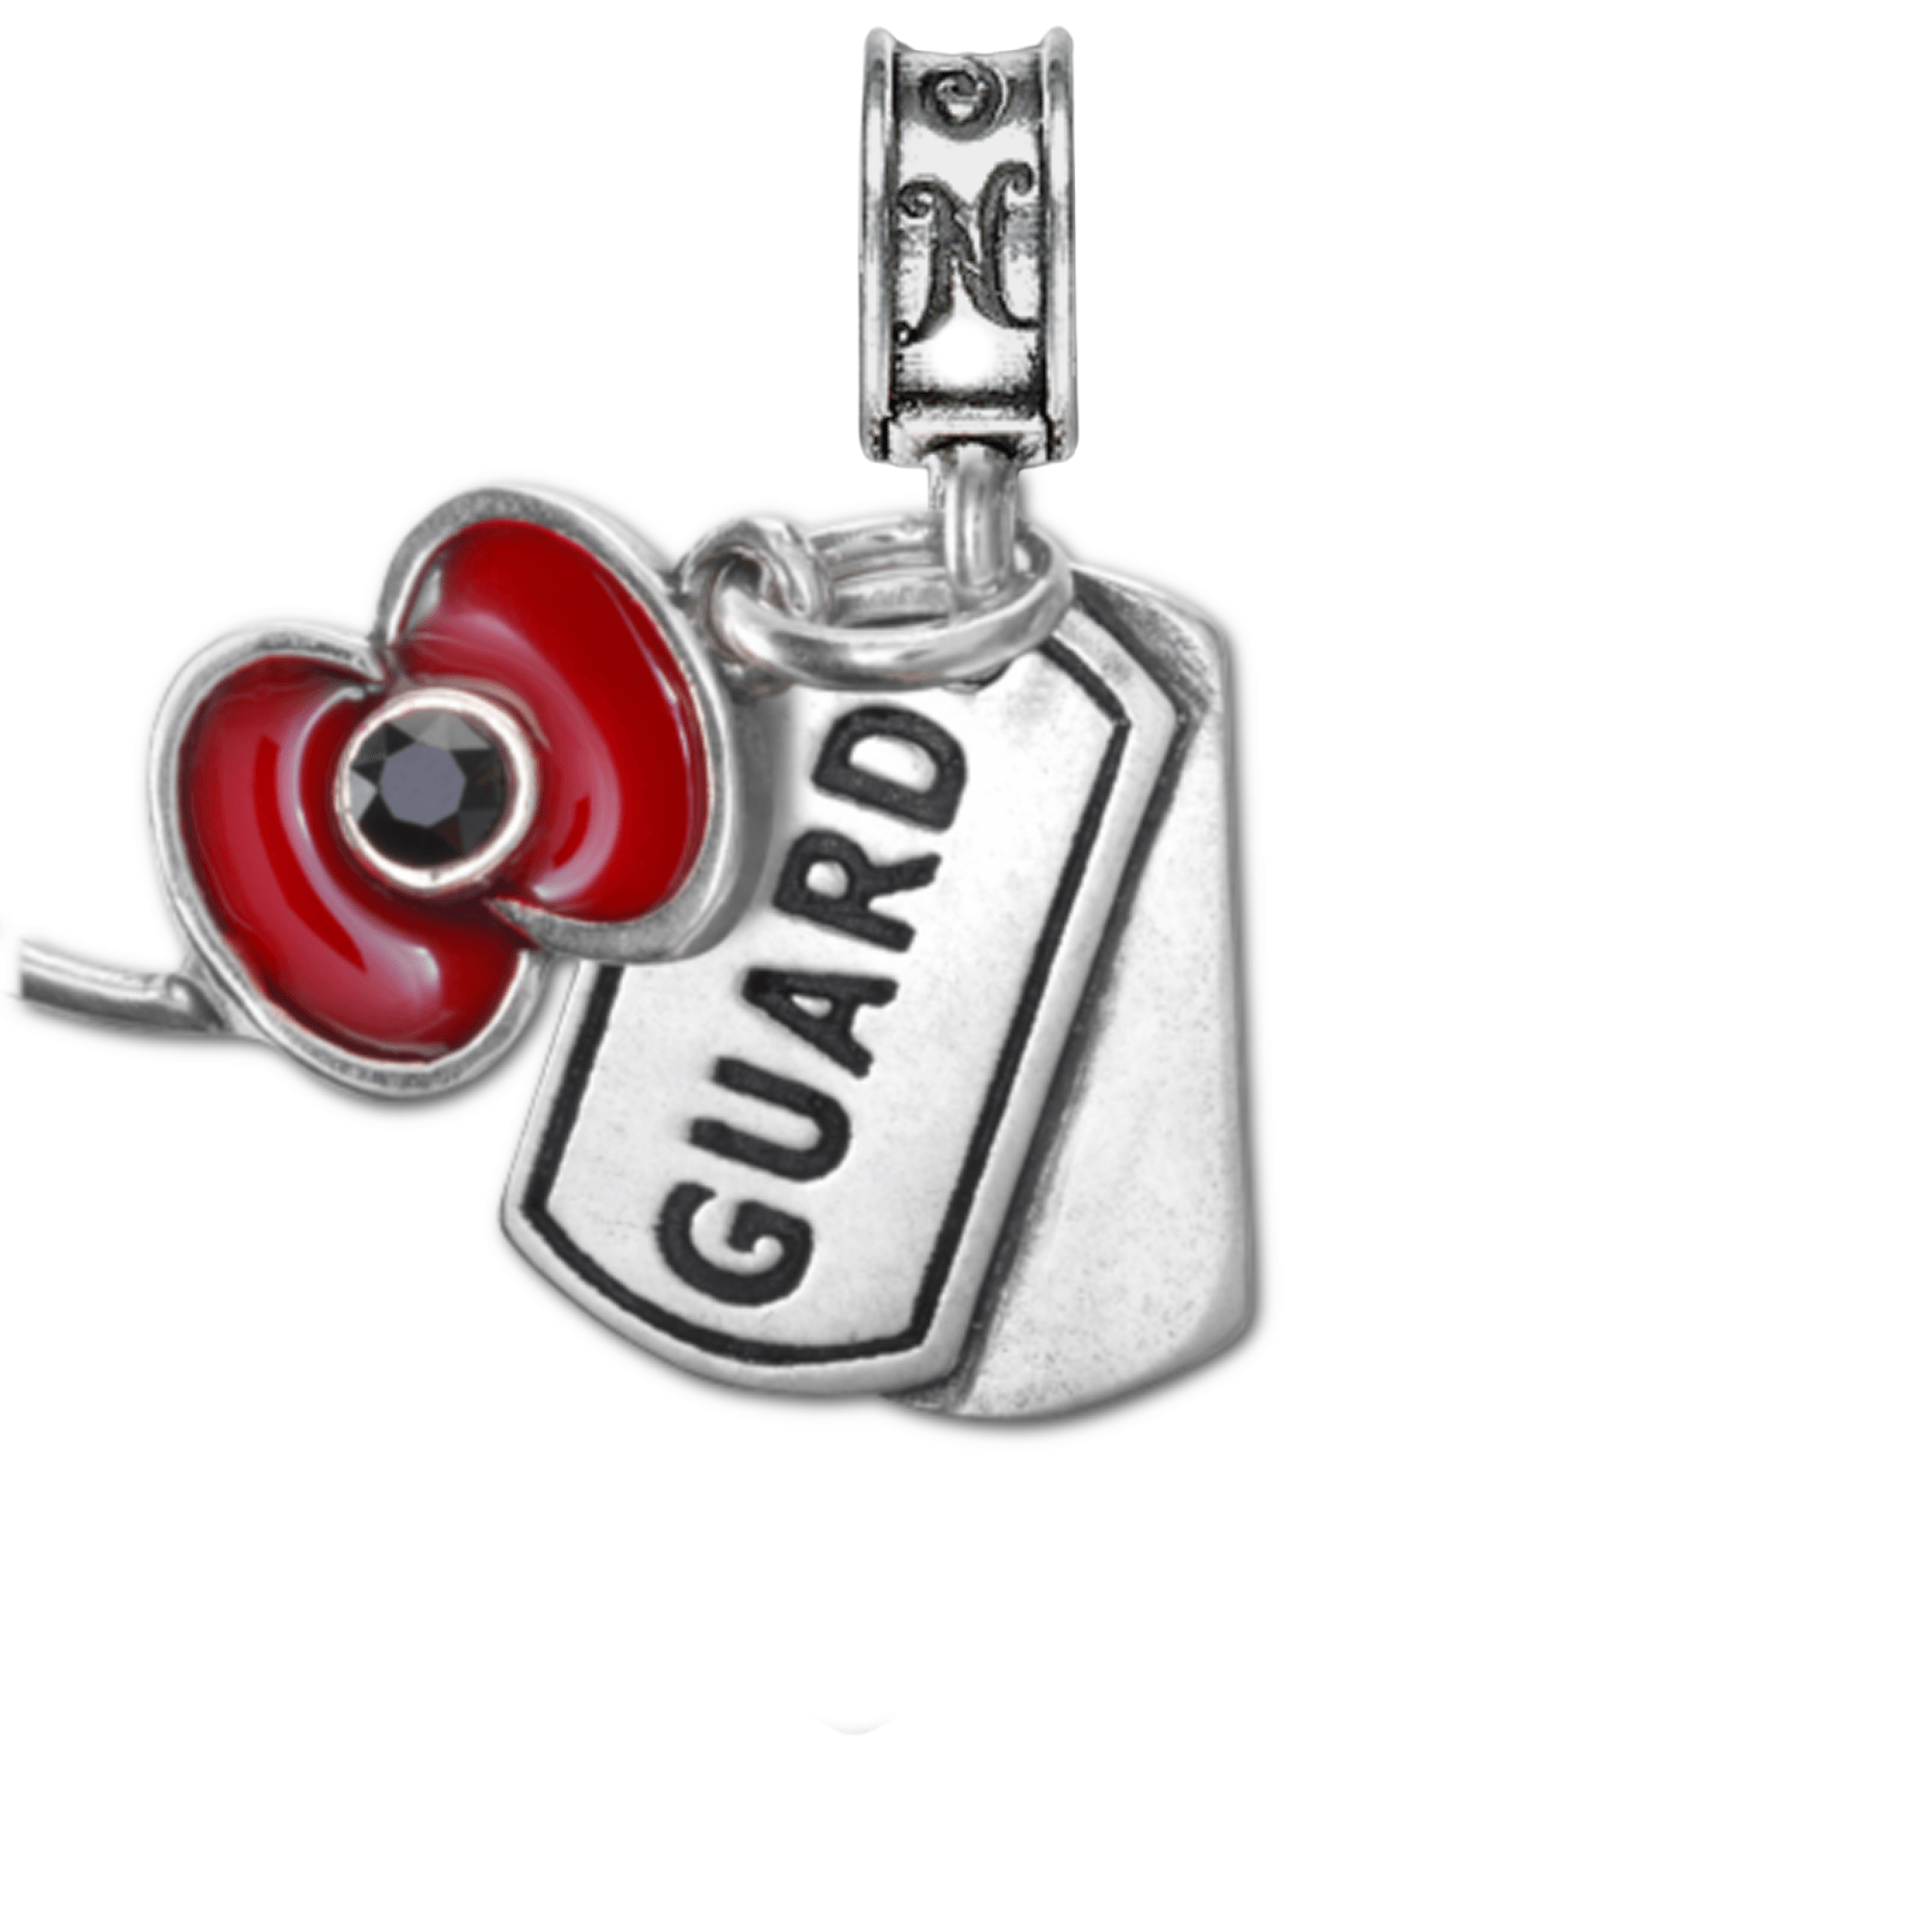 USAF Military Gift Military Charm Air Force Air Army National Guard Poppy